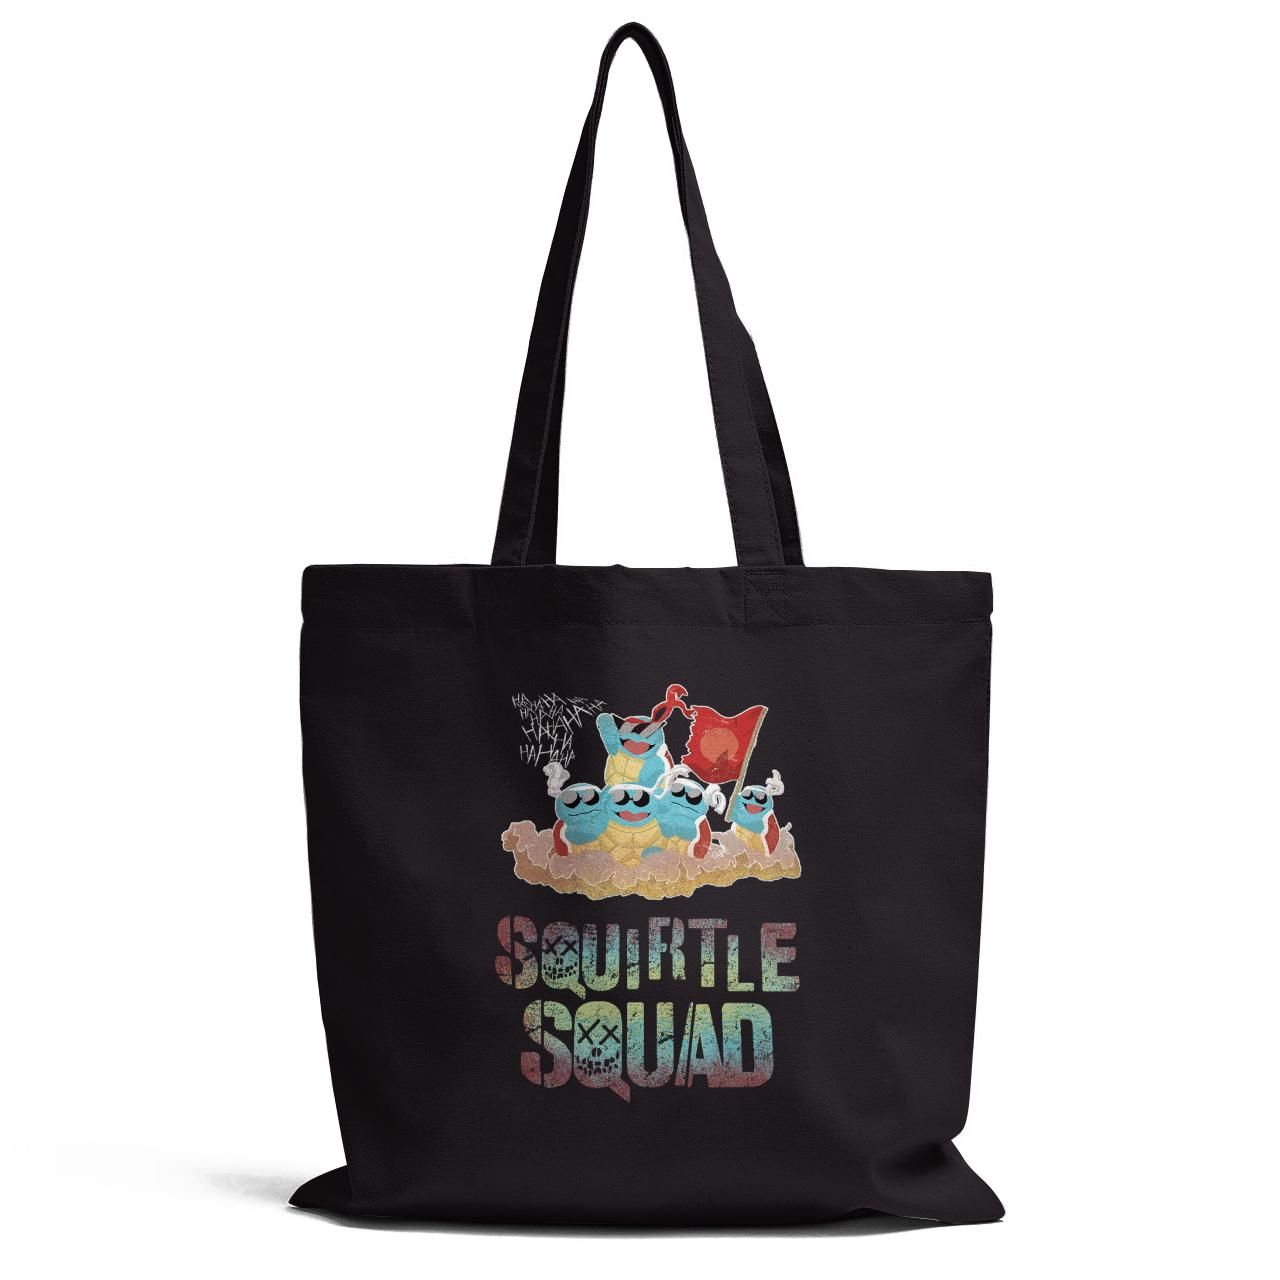 Squirtle Squad Tote Bag PAN